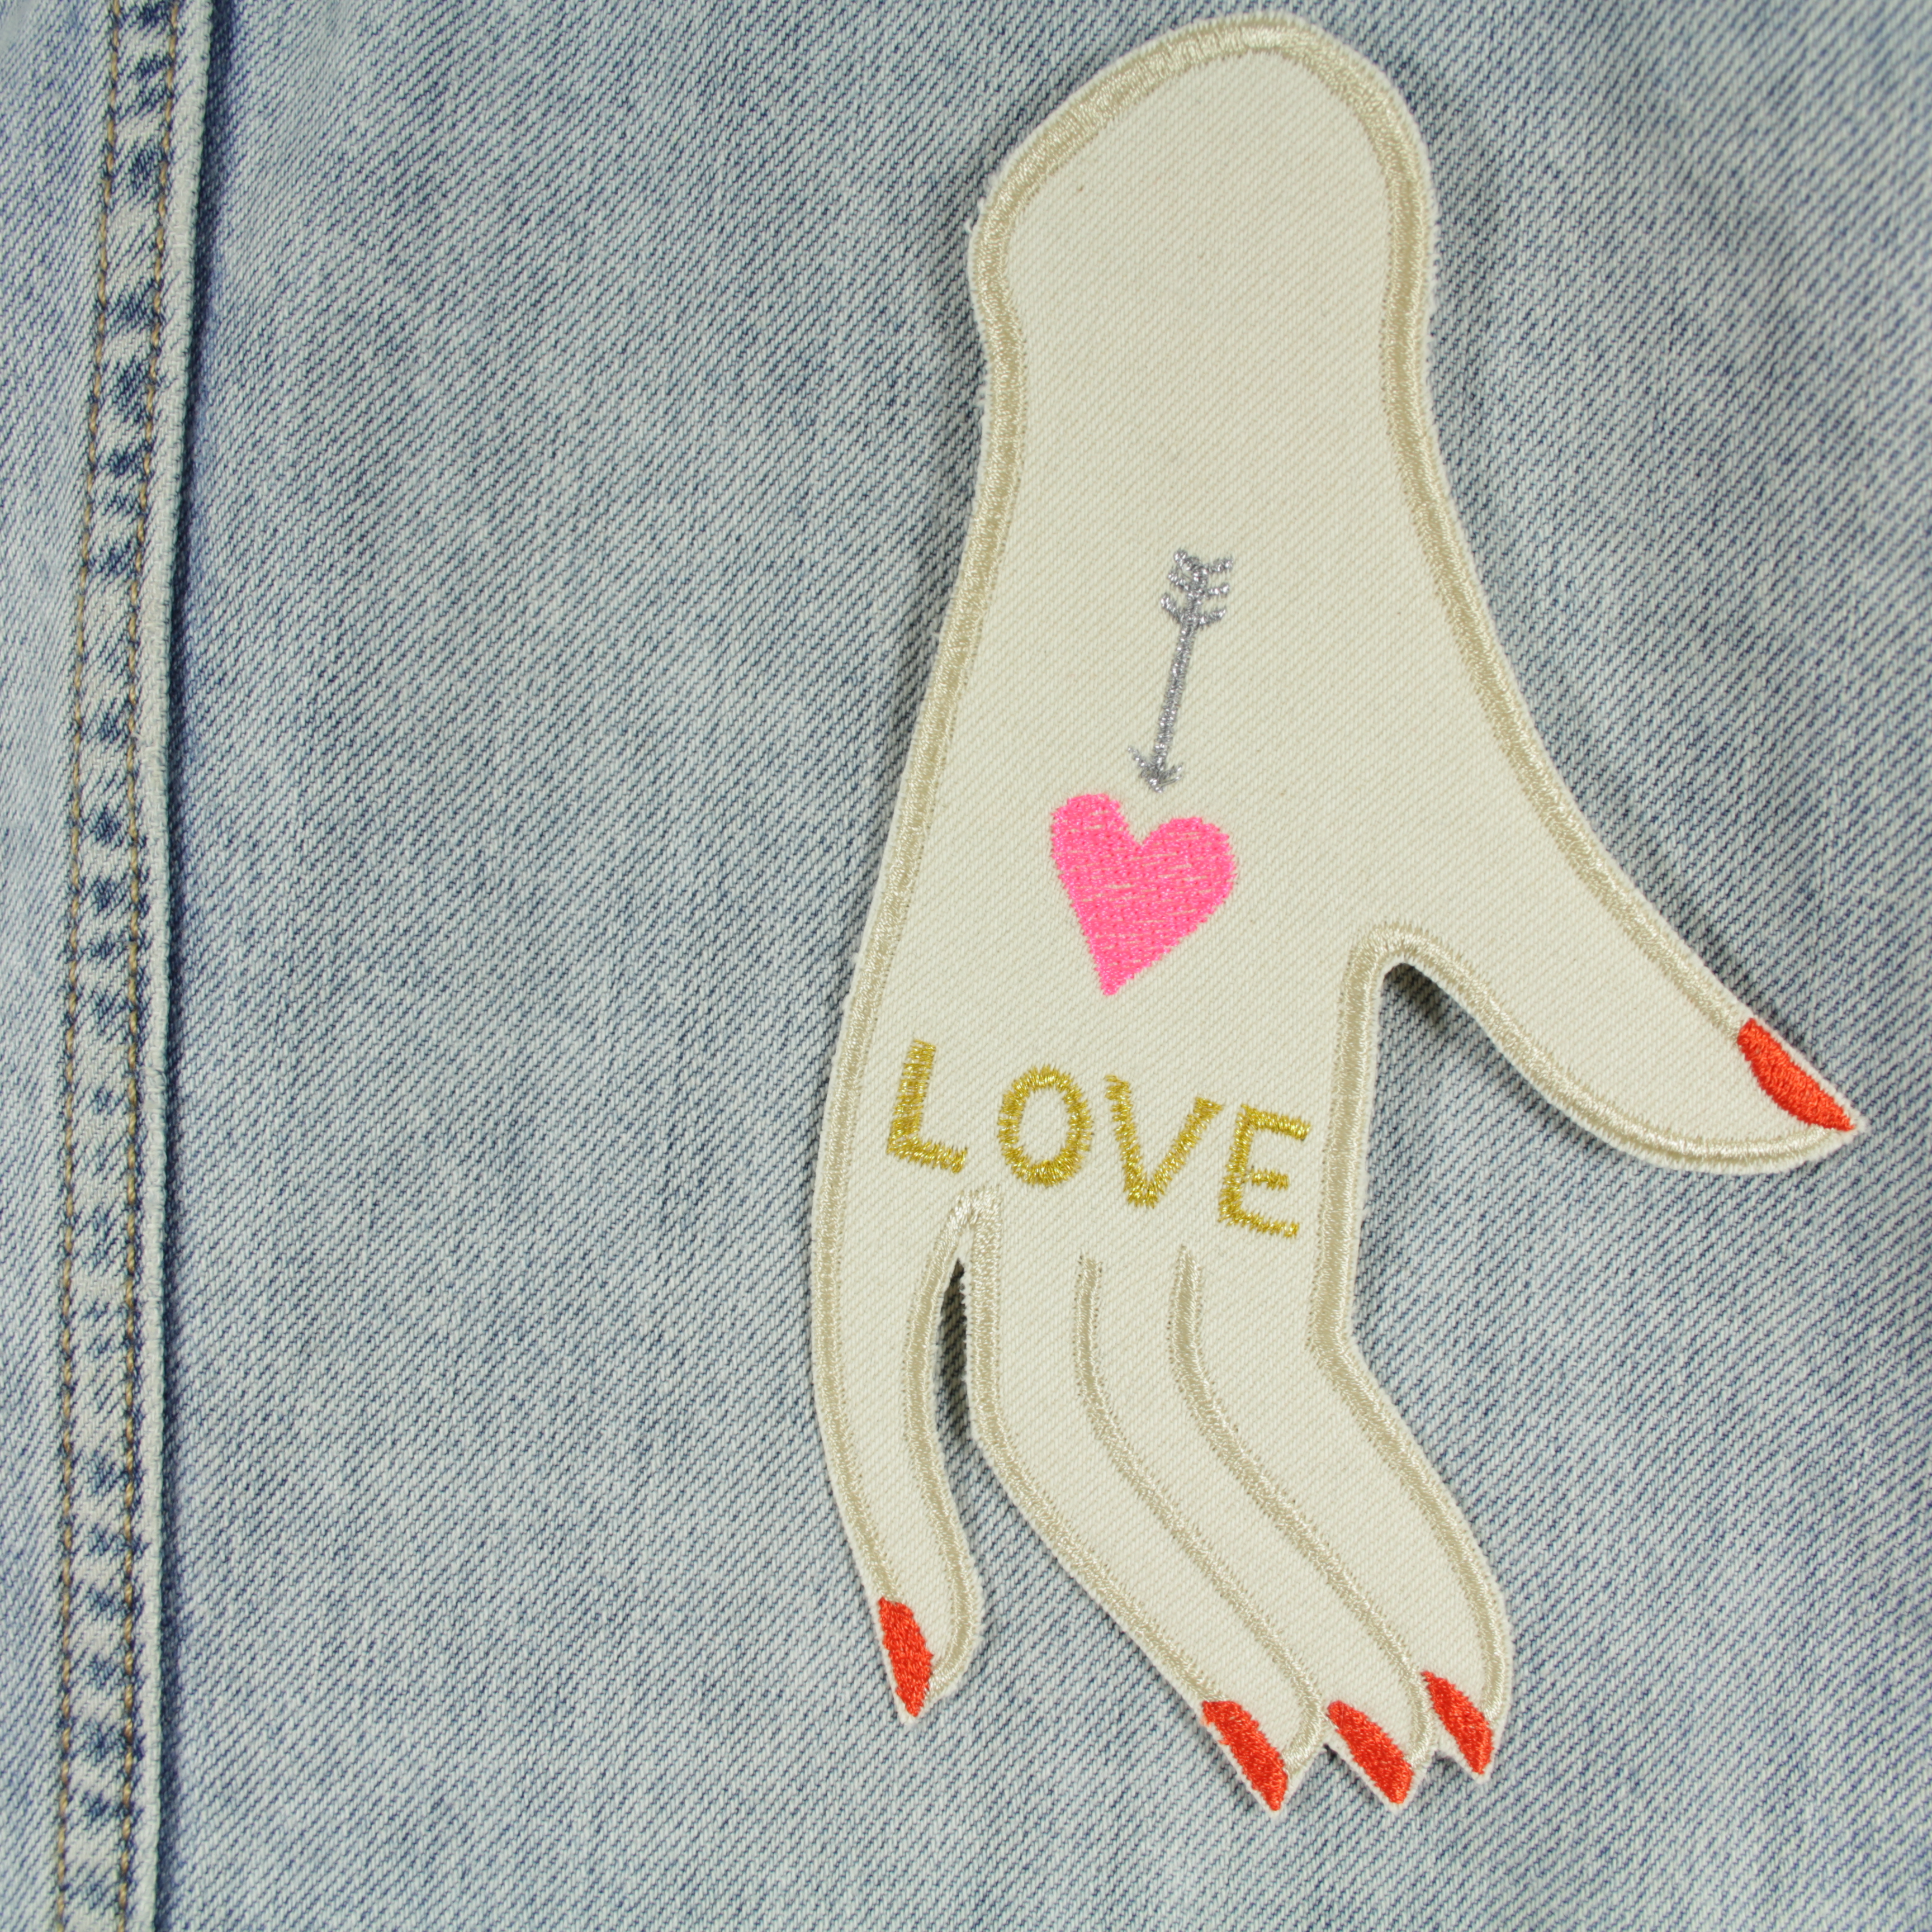 Patch hand "LOVE" large iron-on image gold embroidered on organic canvas for adults